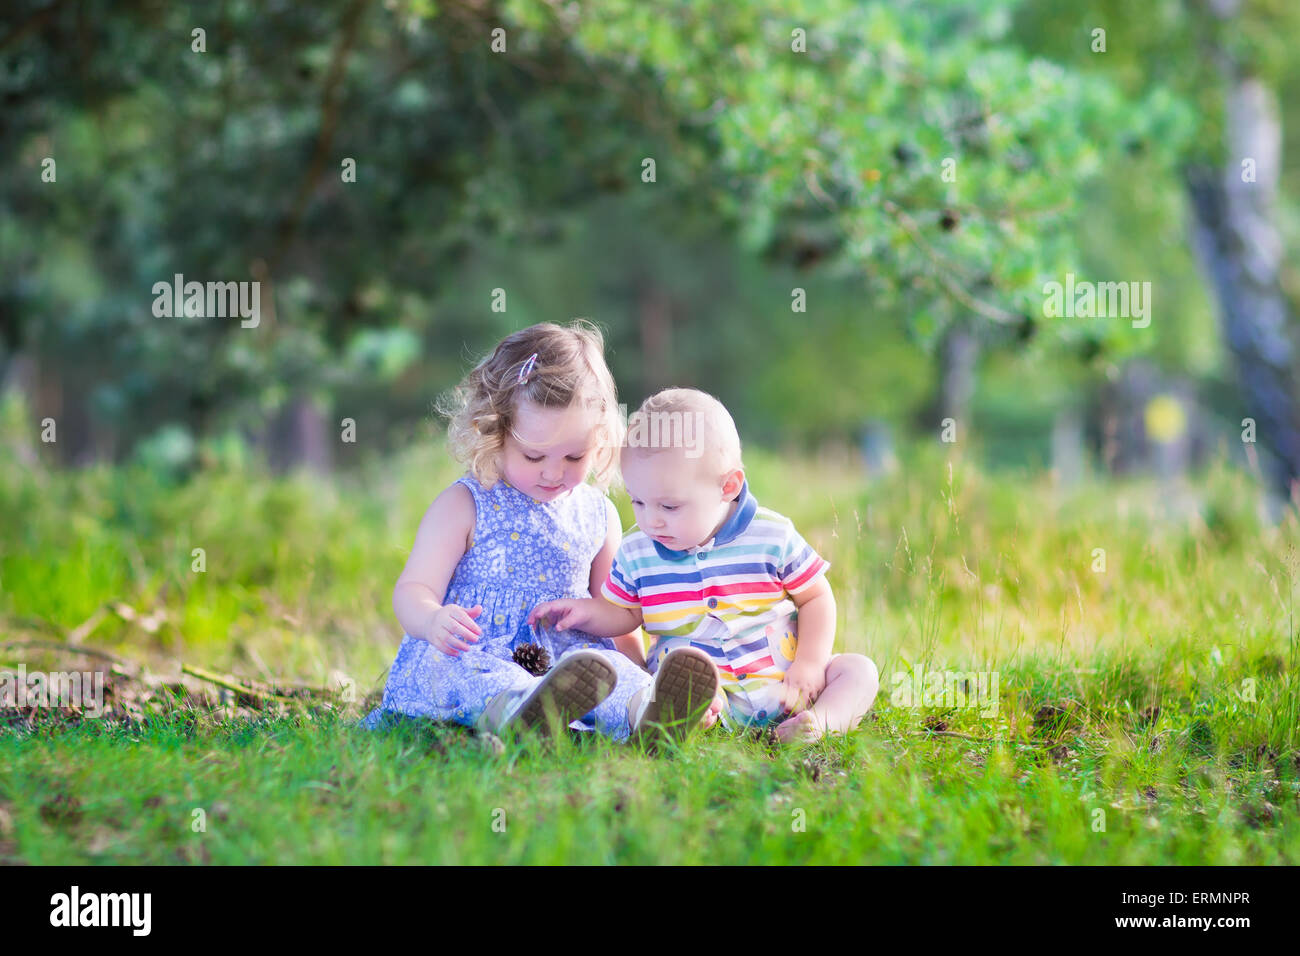 Happy little children, adorable toddler girl in a blue dress and a cute baby boy, brother and sister, playing with pine cones Stock Photo